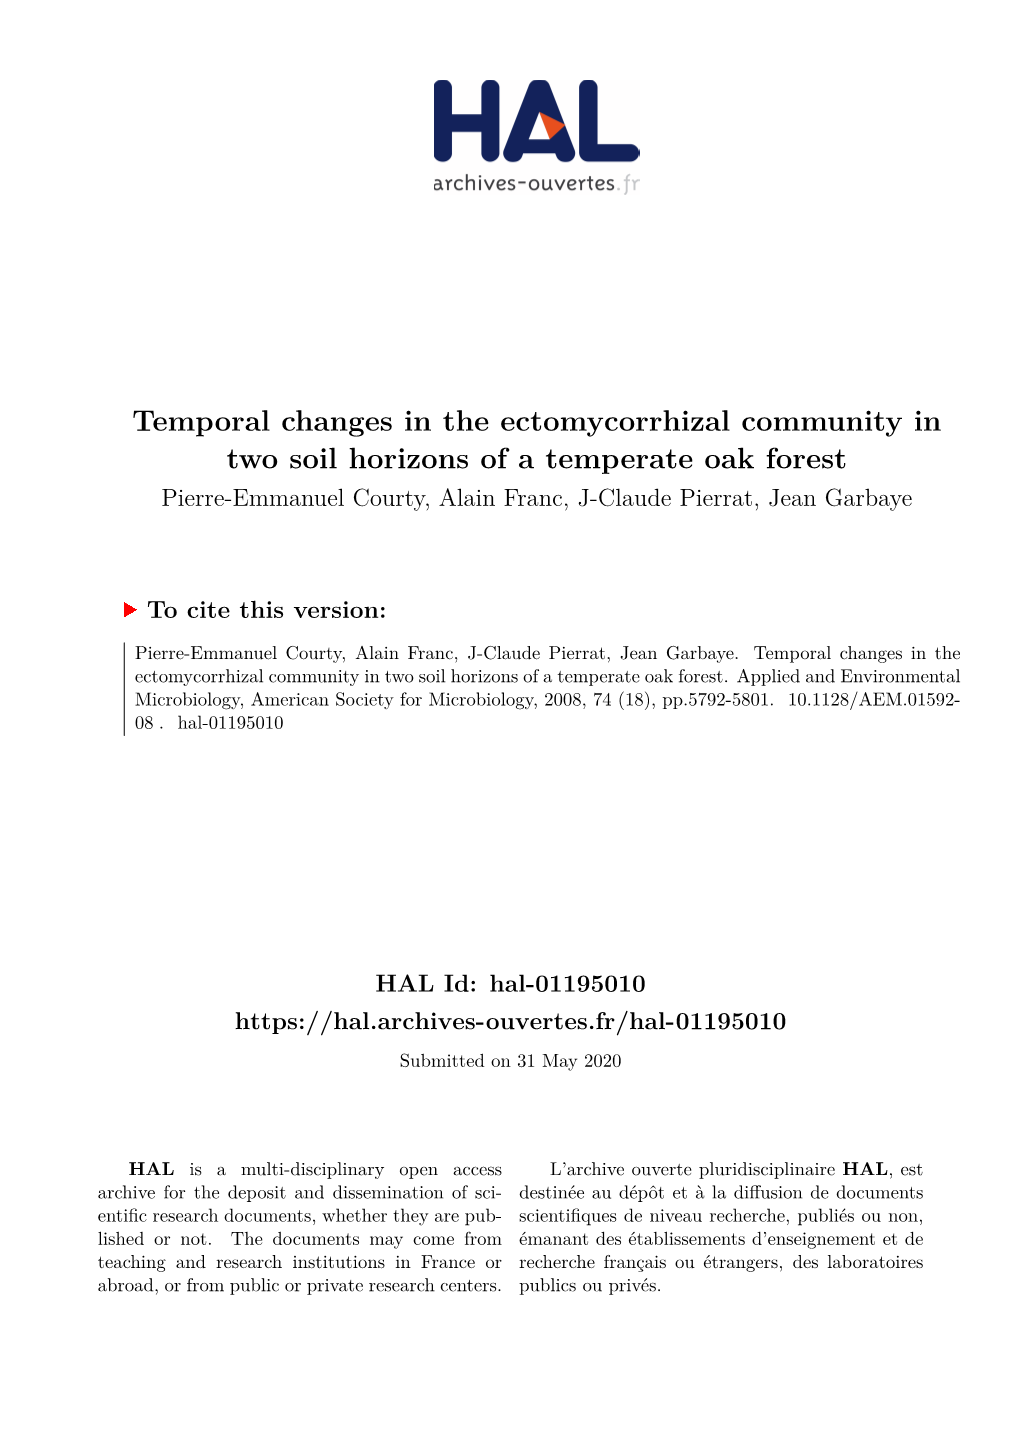 Temporal Changes in the Ectomycorrhizal Community in Two Soil Horizons of a Temperate Oak Forest Pierre-Emmanuel Courty, Alain Franc, J-Claude Pierrat, Jean Garbaye